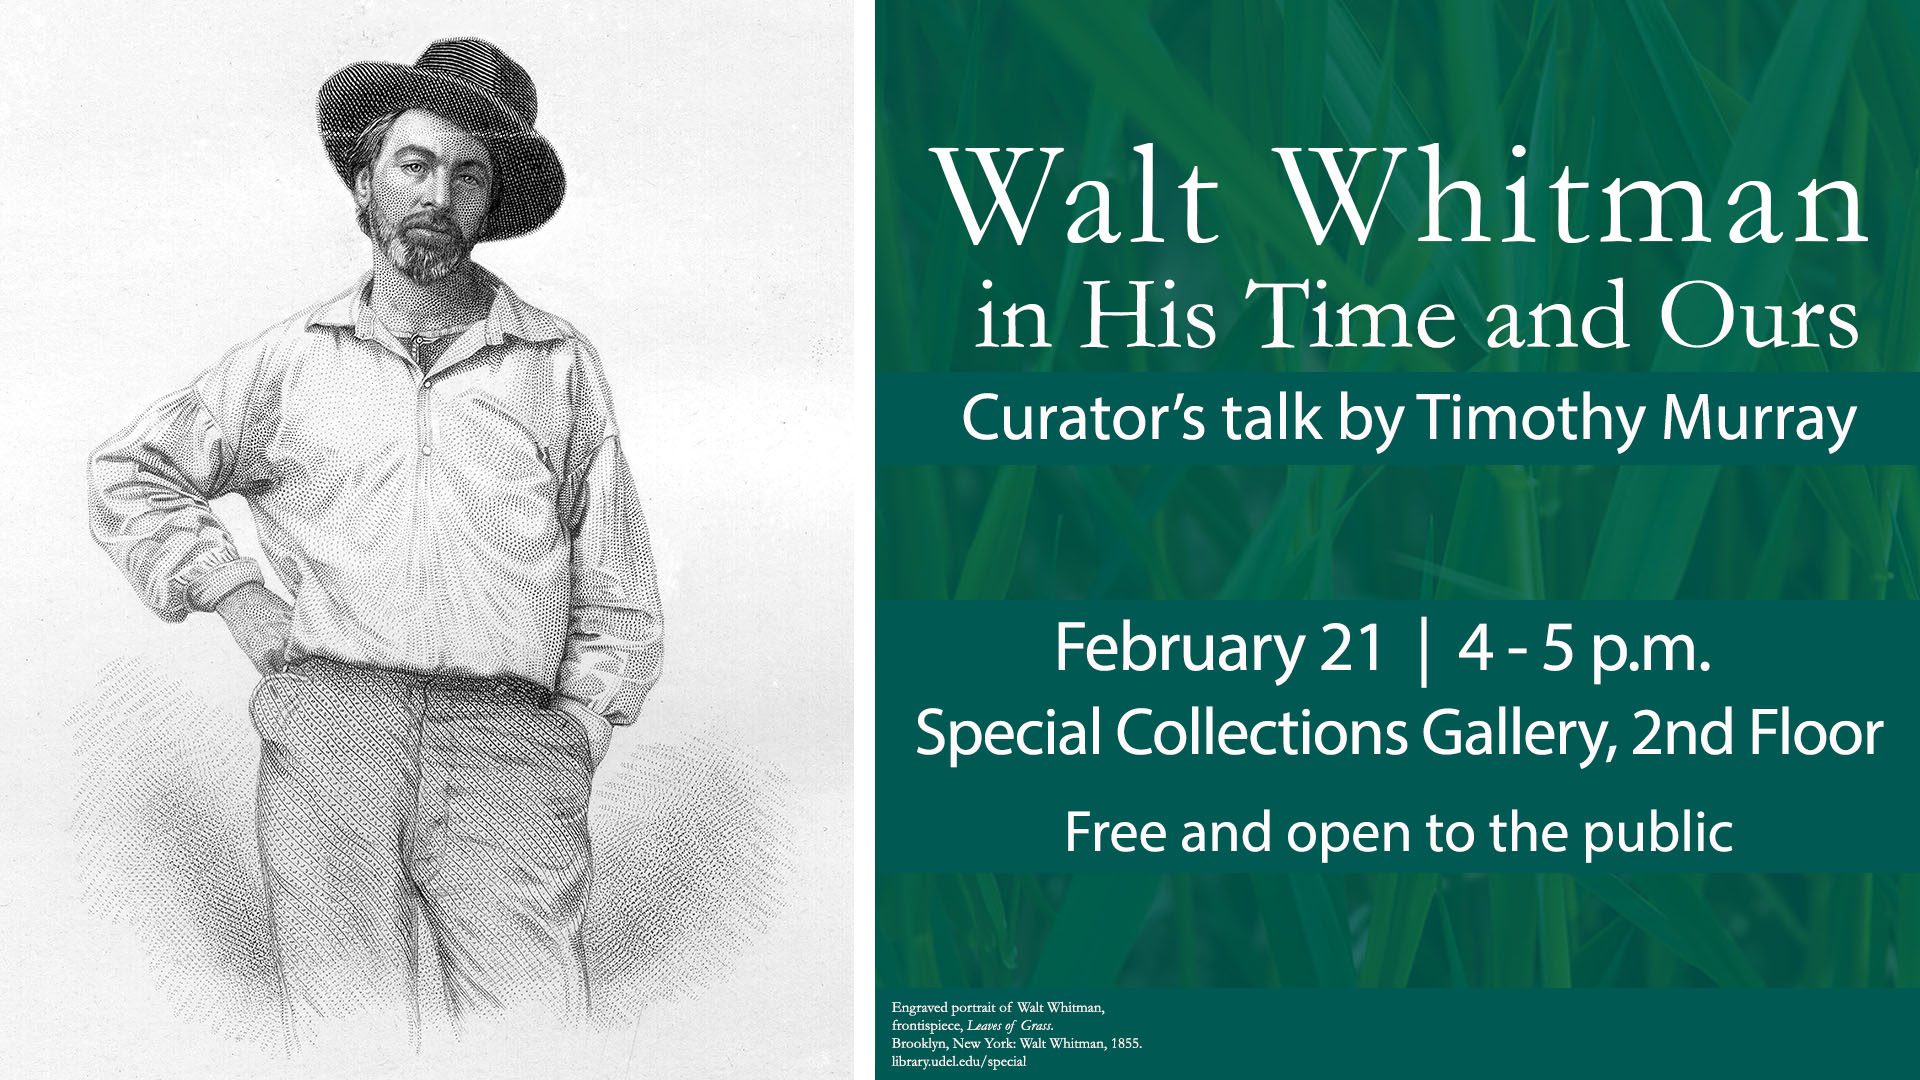 Curator's Talk: Walt Whitman in His Time and Ours